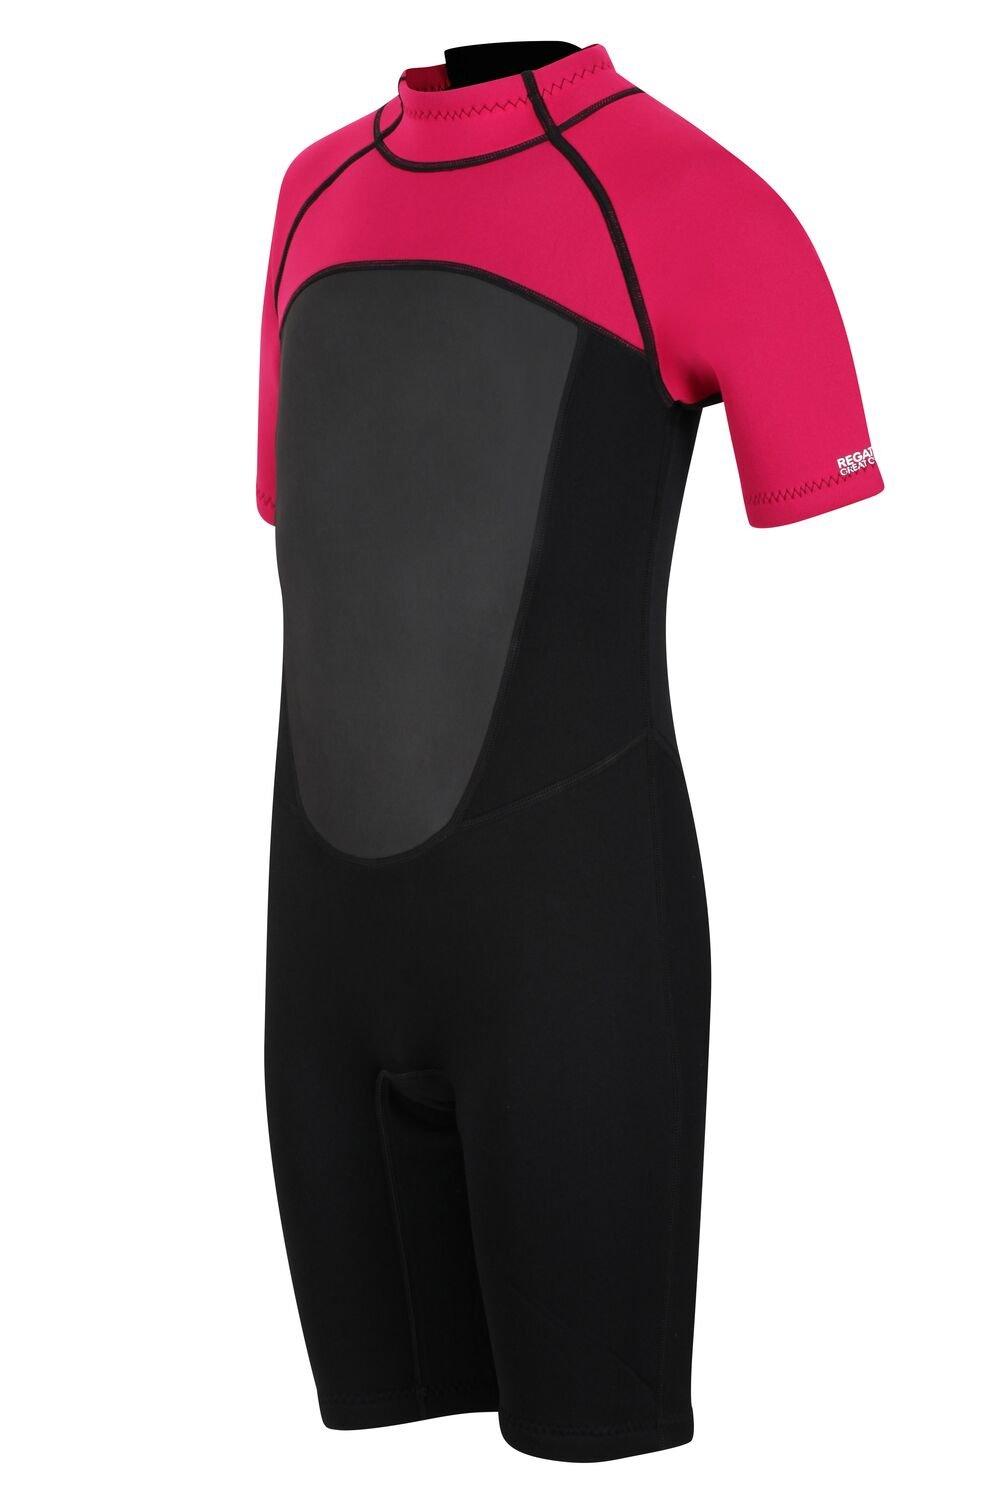 Kids 'Shorty' Wetsuit